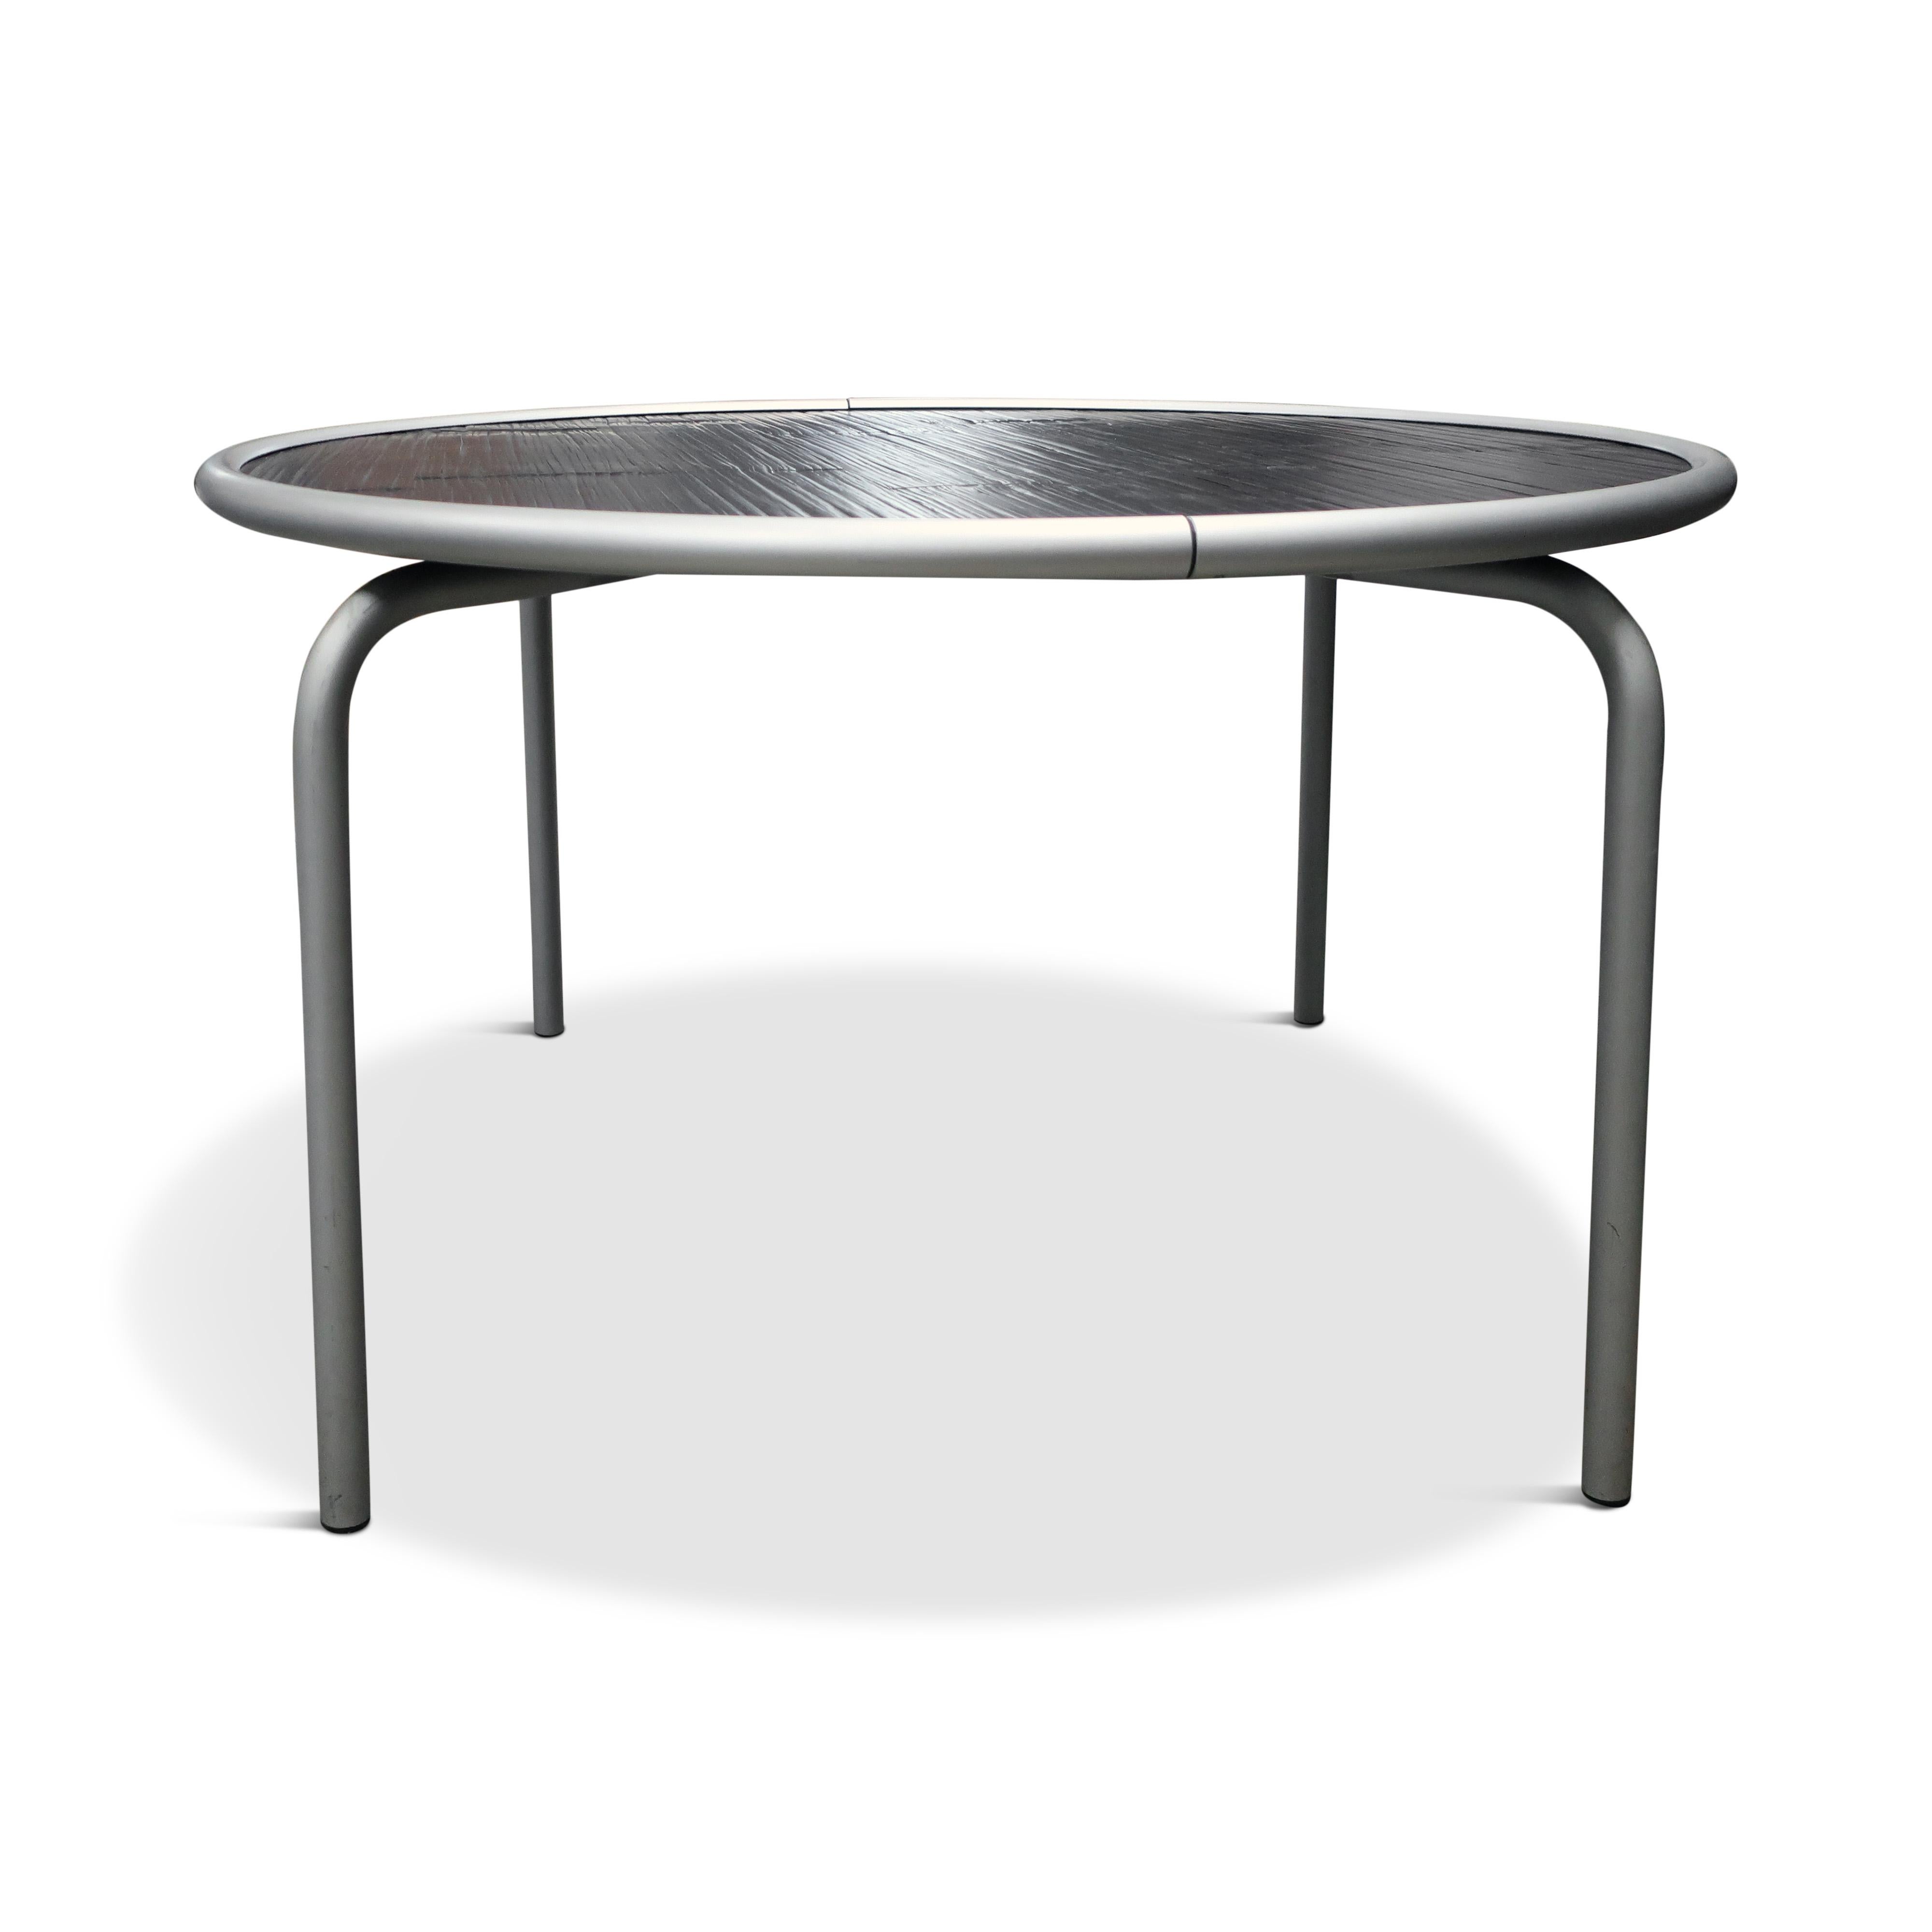 Modern Allu 136 Dining Table by Paola Navone for Gervasoni, '1999' For Sale